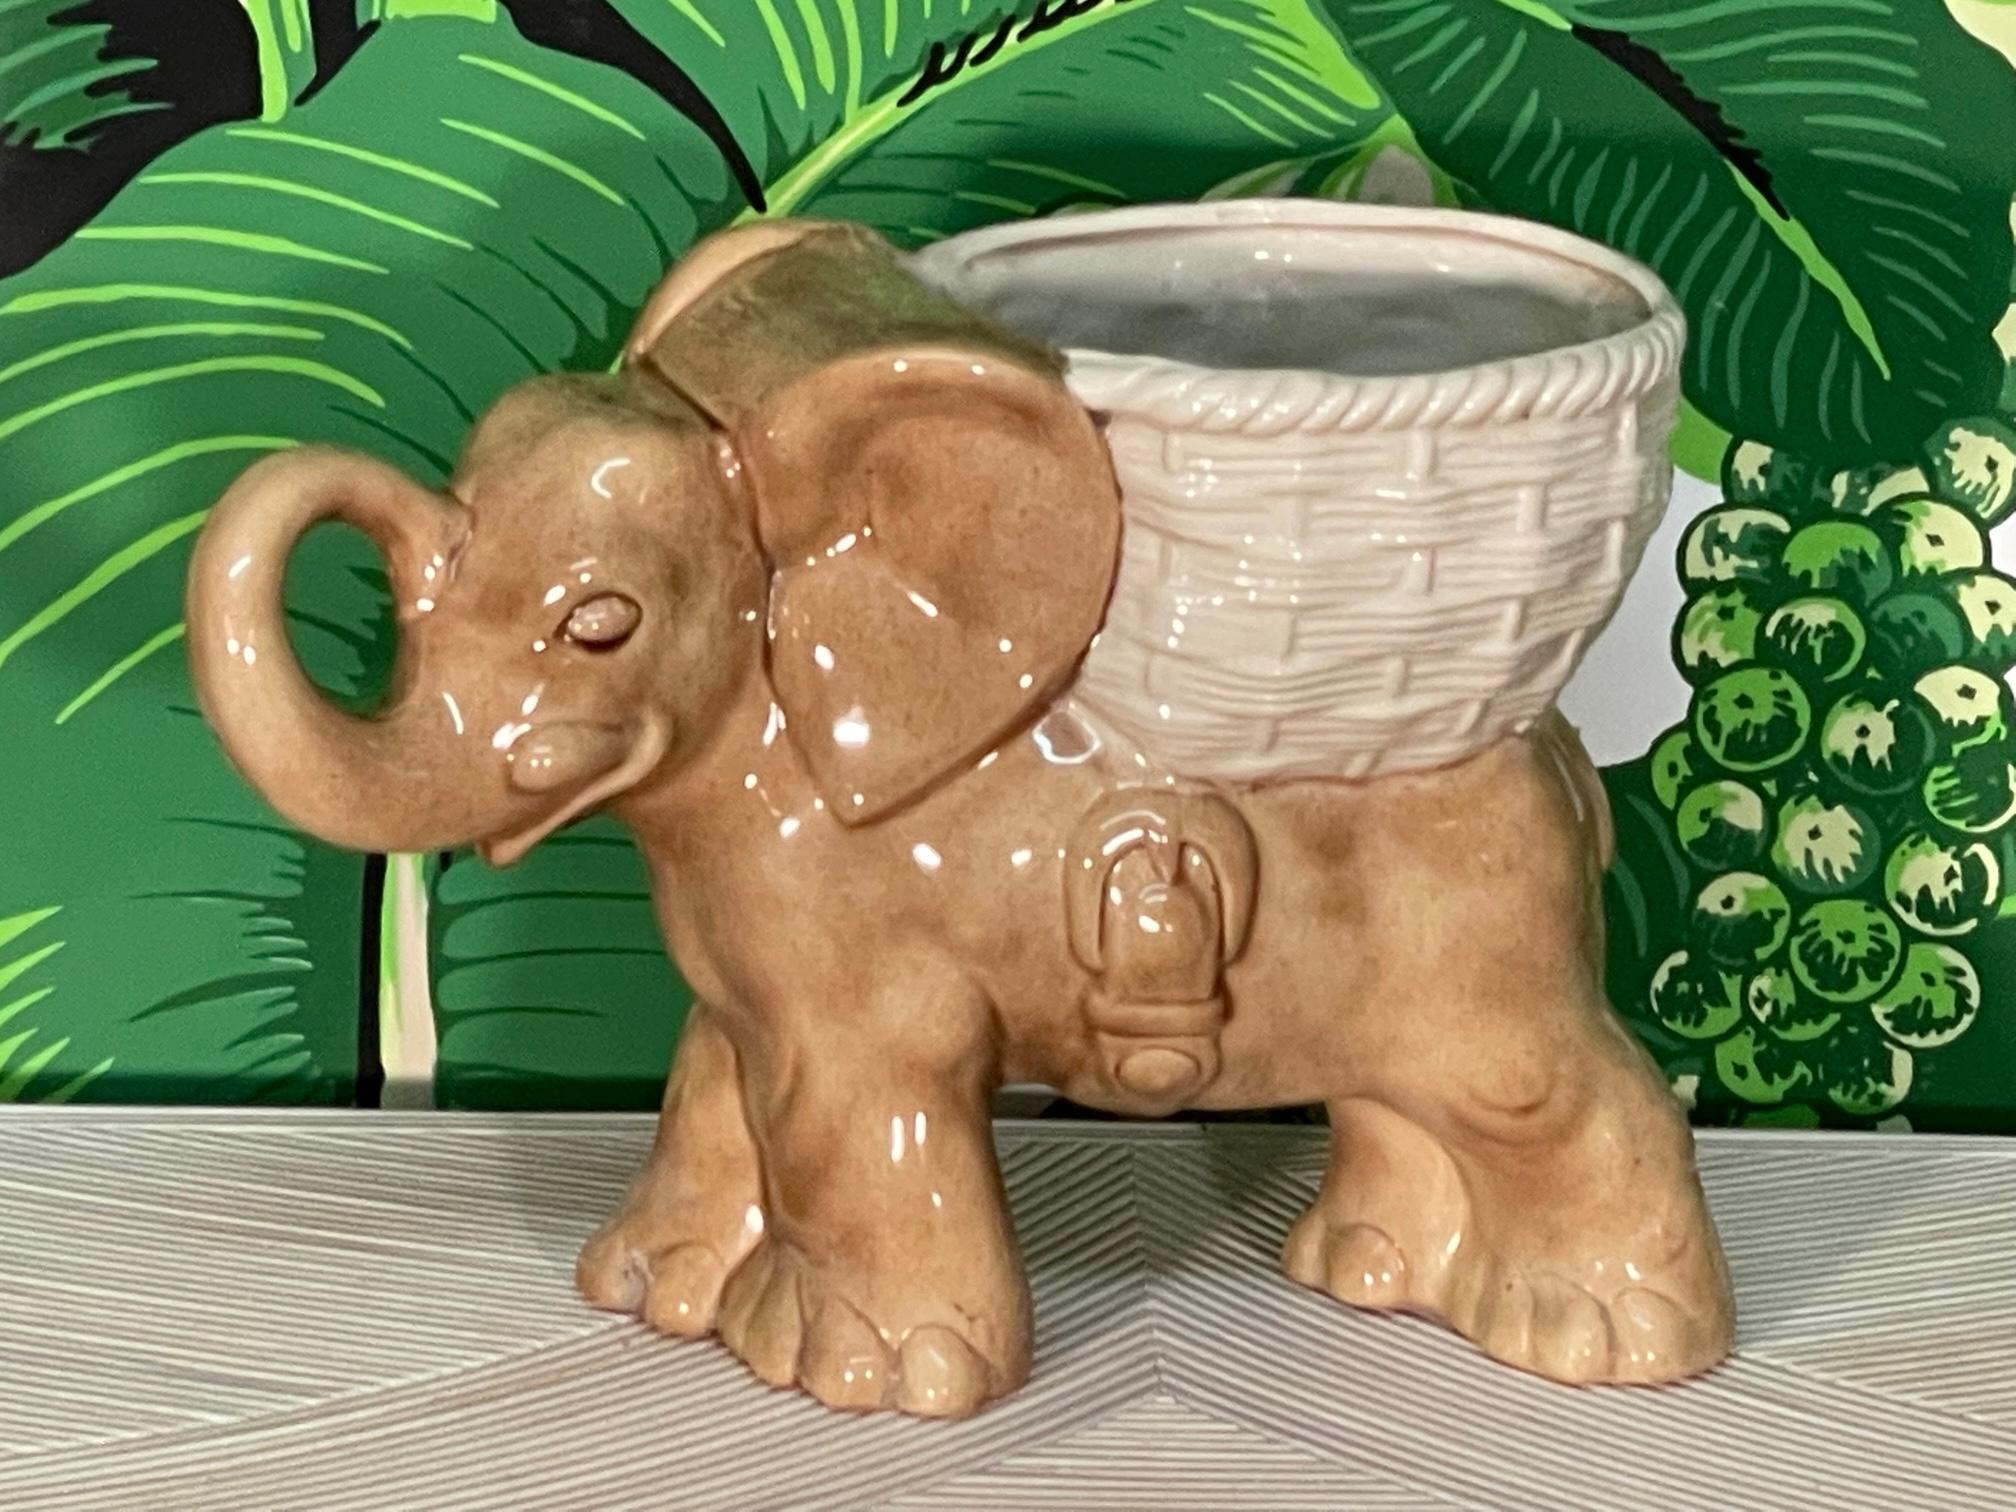 Vintage ceramic elephant planter features an uplifted trunk (for good luck!) and a glossy glazed finish. Very good condition with only minor imperfections consistent with age, see photos for condition details.
